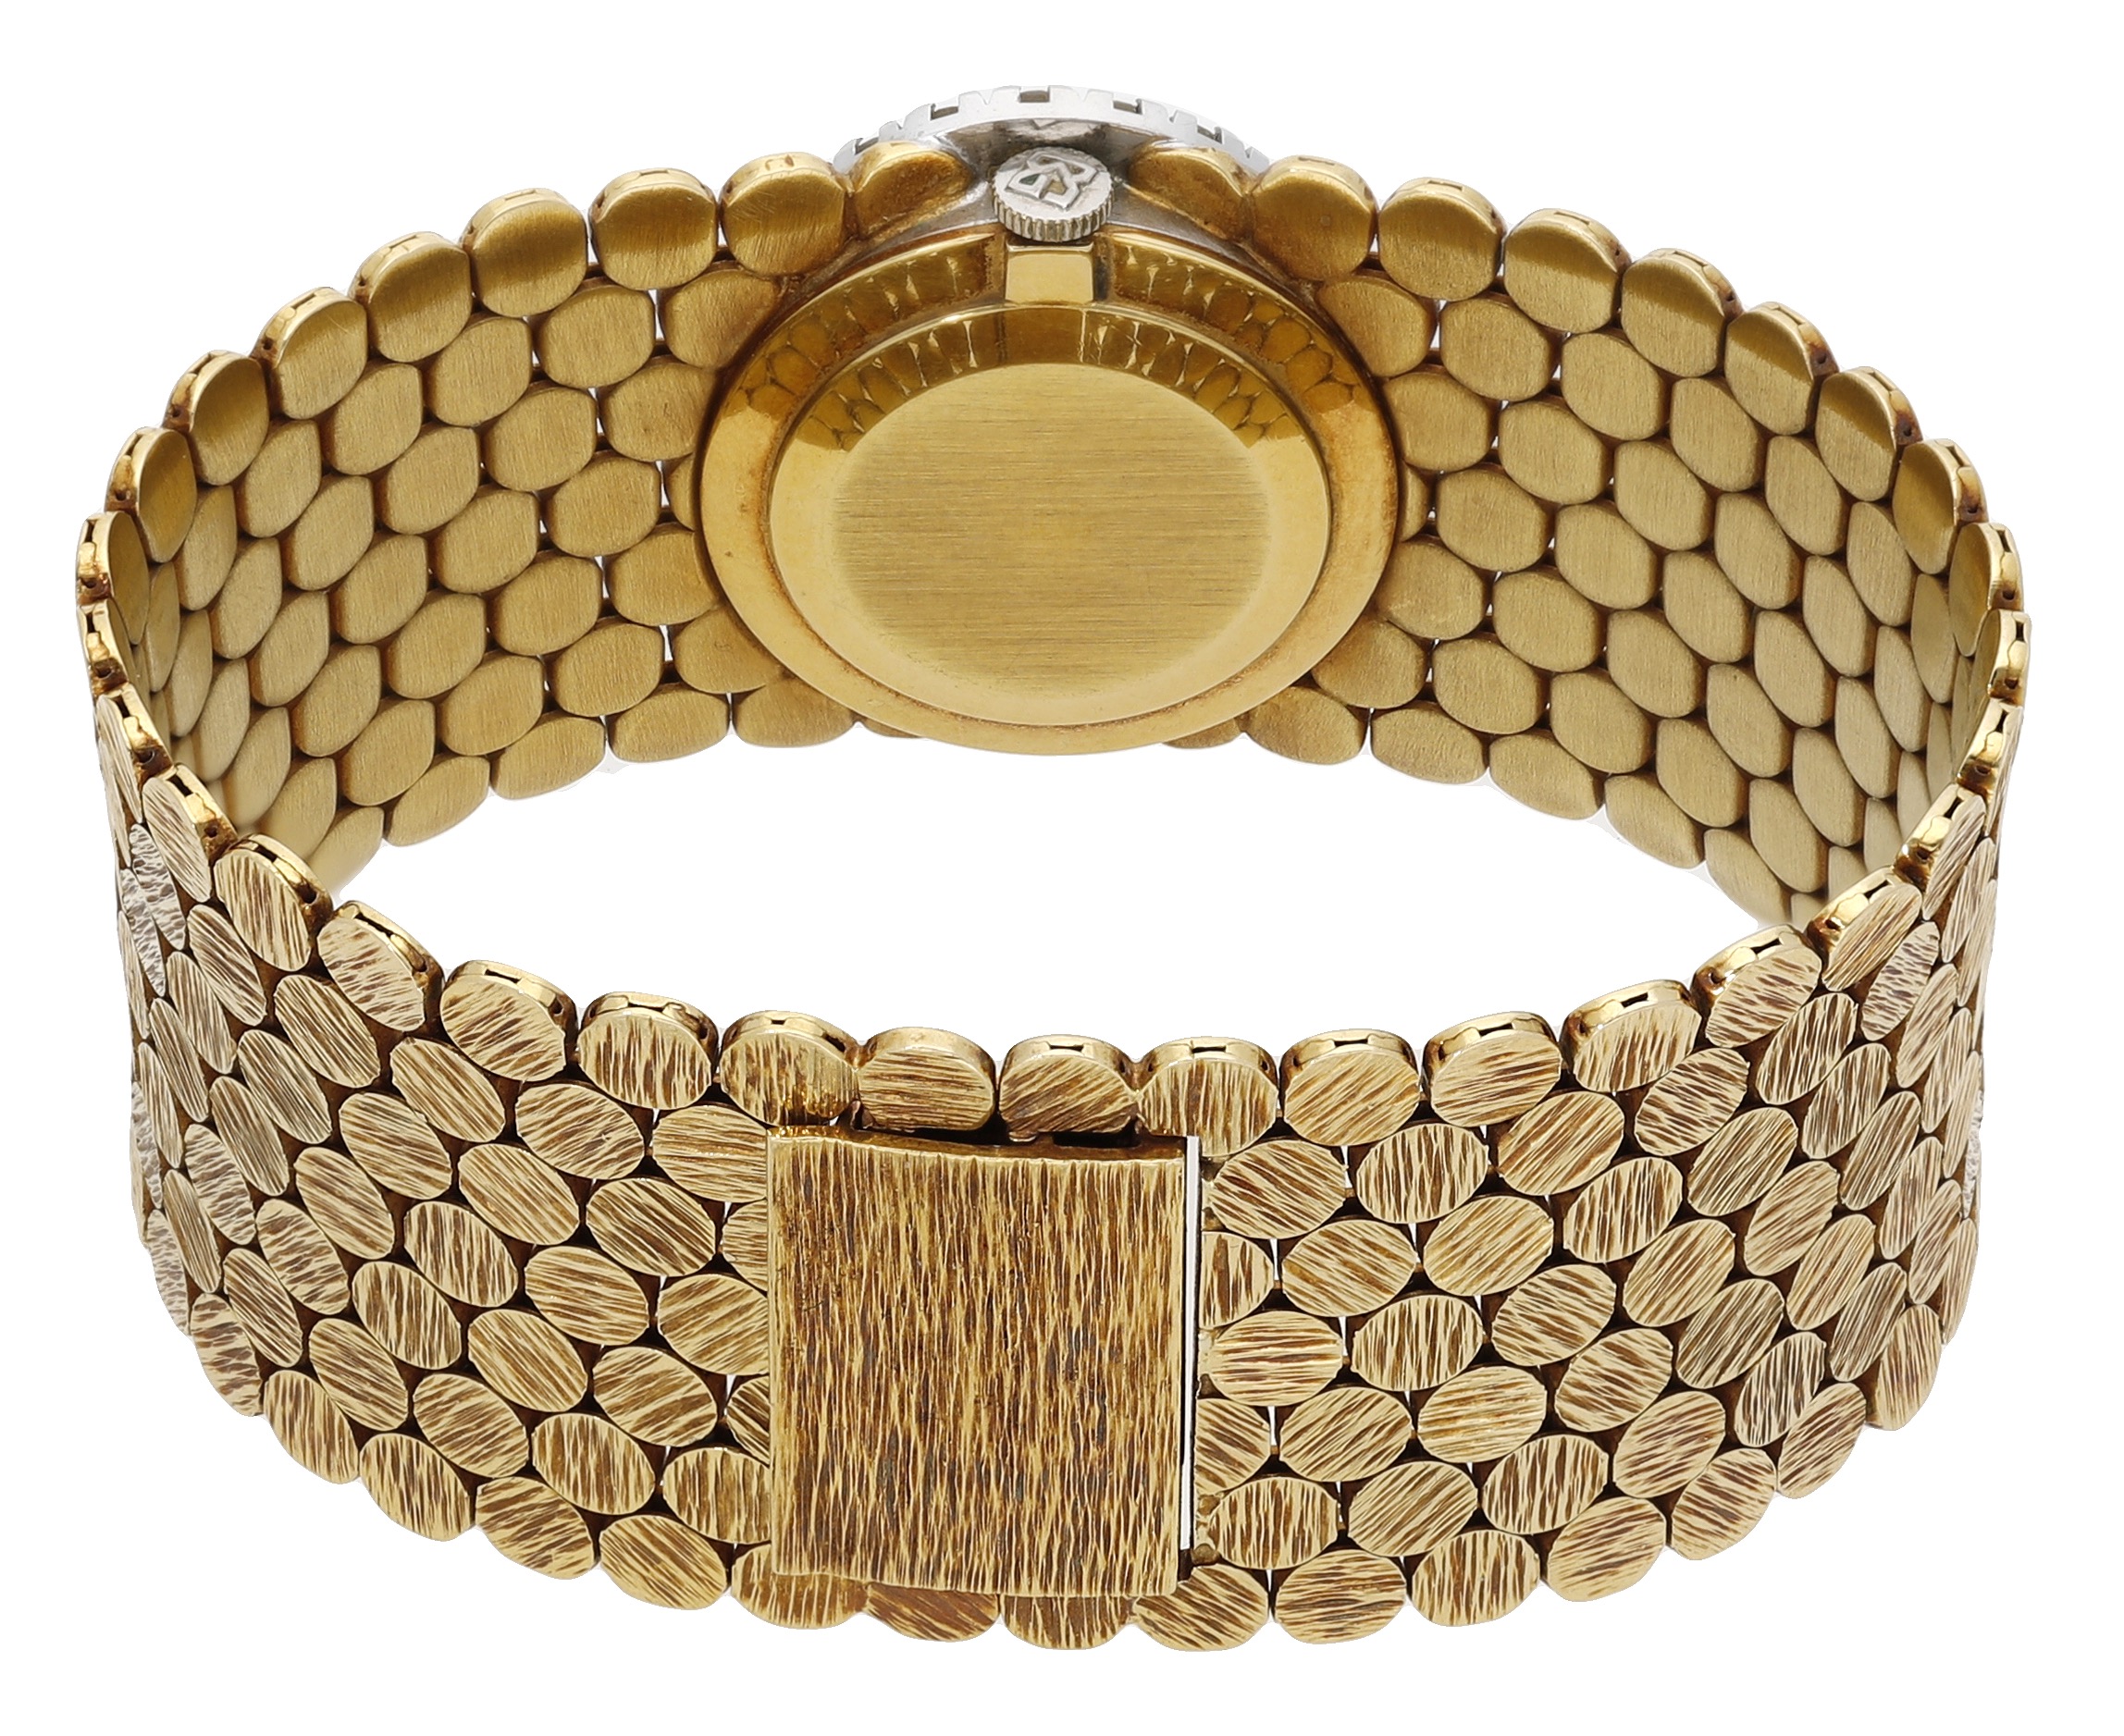 Bueche Girod. A gold and diamond-set bracelet watch with tiger's eye dial, circa 1971. Move... - Image 2 of 6